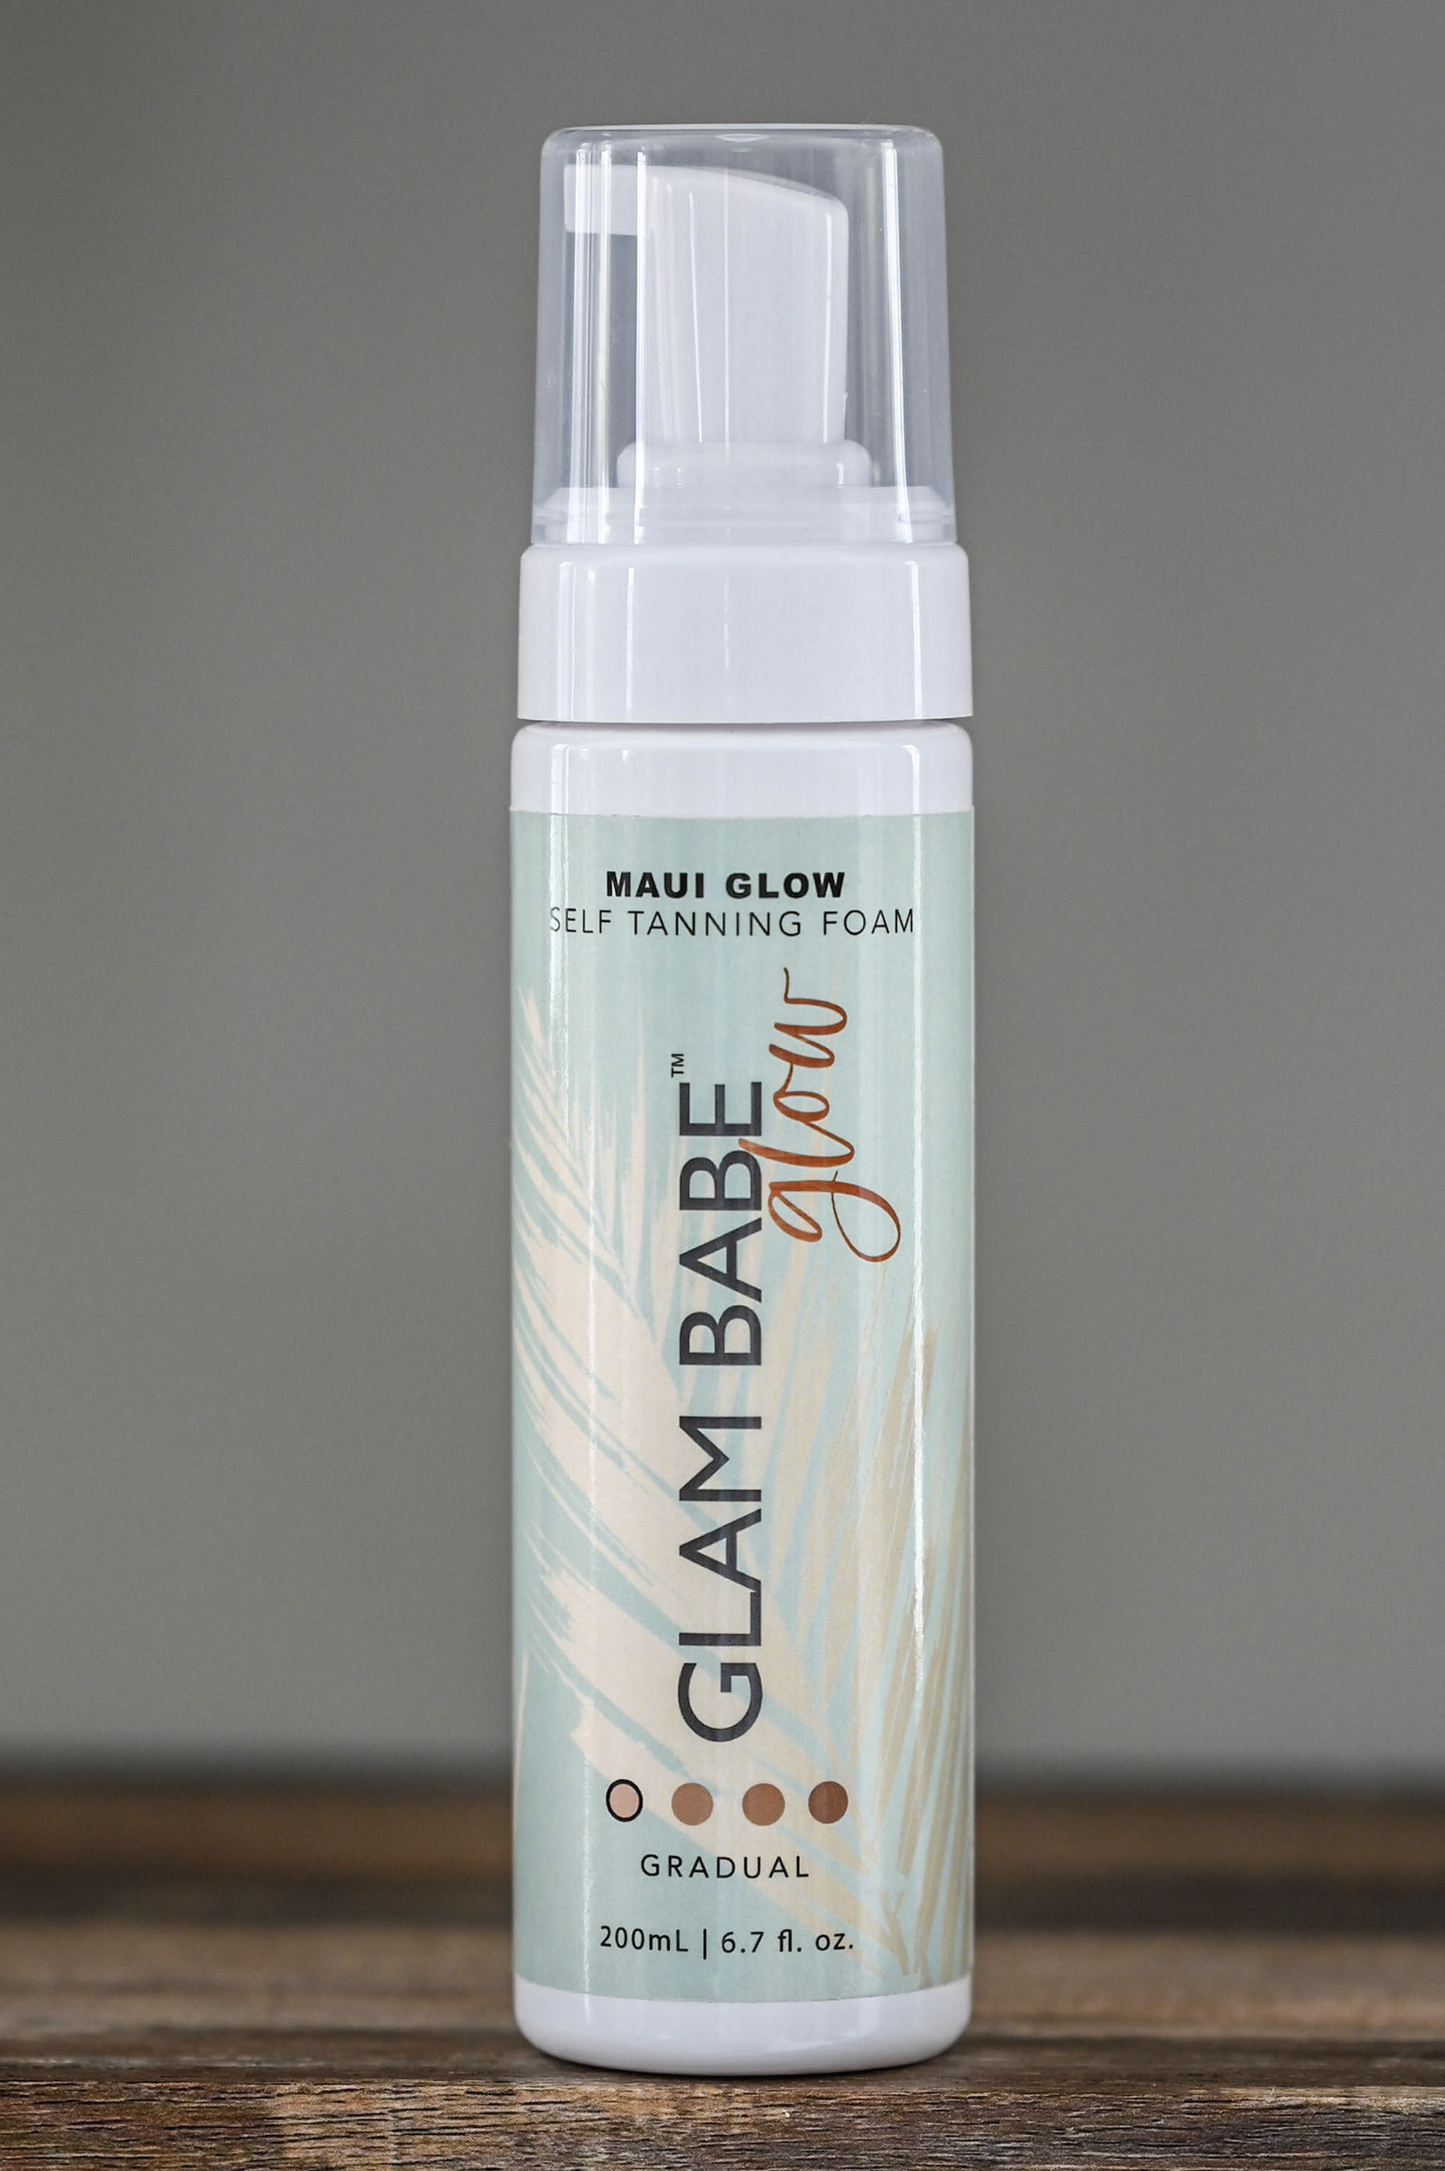 Maui Glow by Glam Babe Tanning Foam